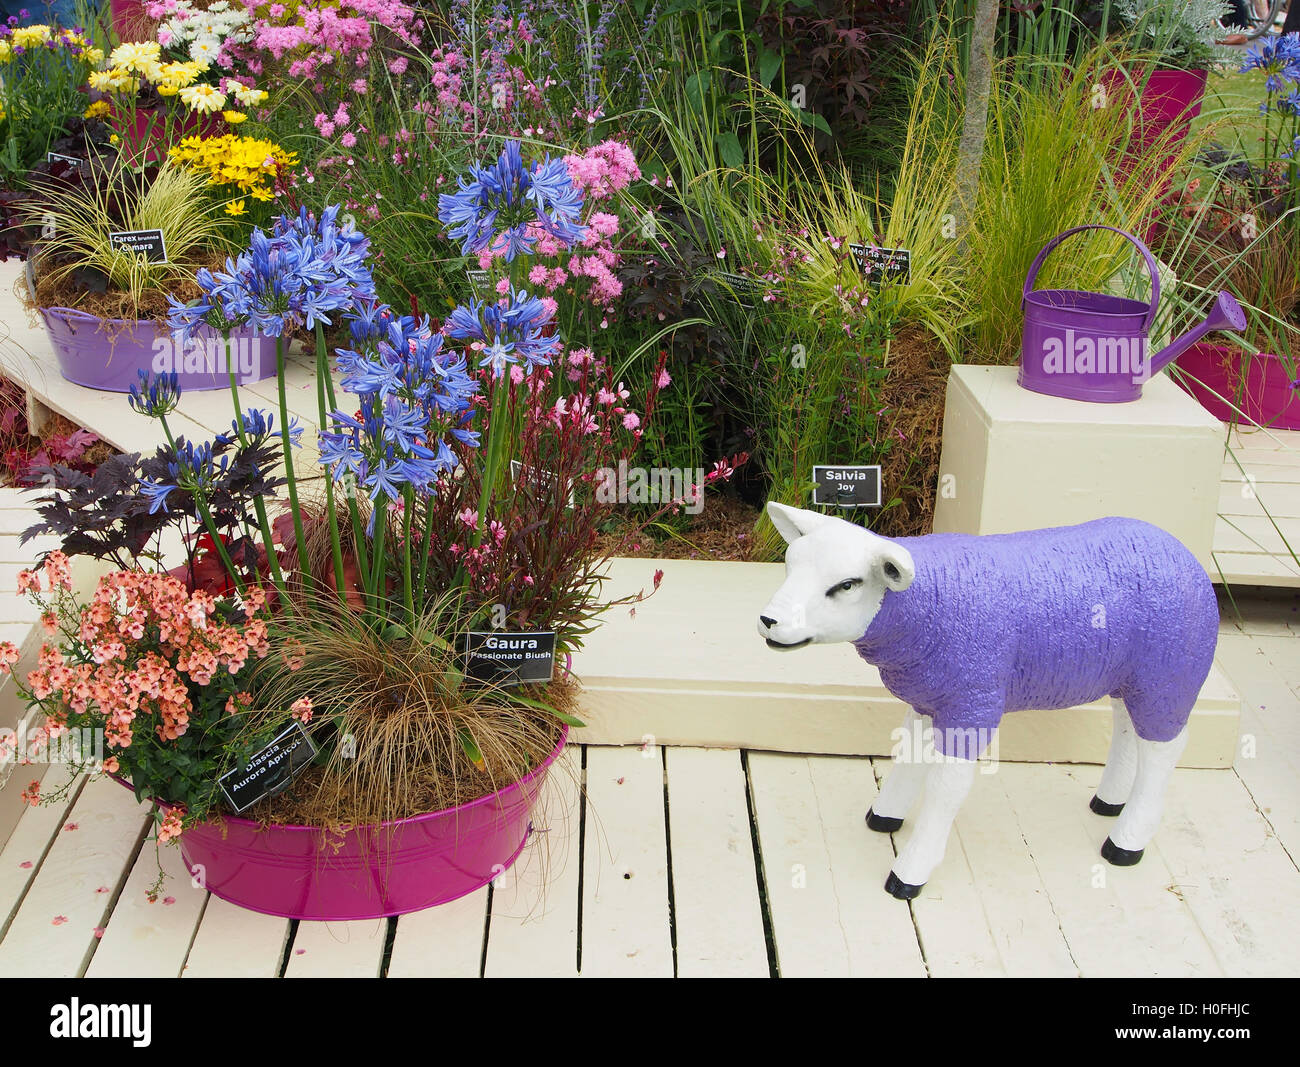 Display of various flowers growing in pots with a lilac fibreglass sheep at Tatton Park Flower Show 2016 in Cheshire, UK. Stock Photo